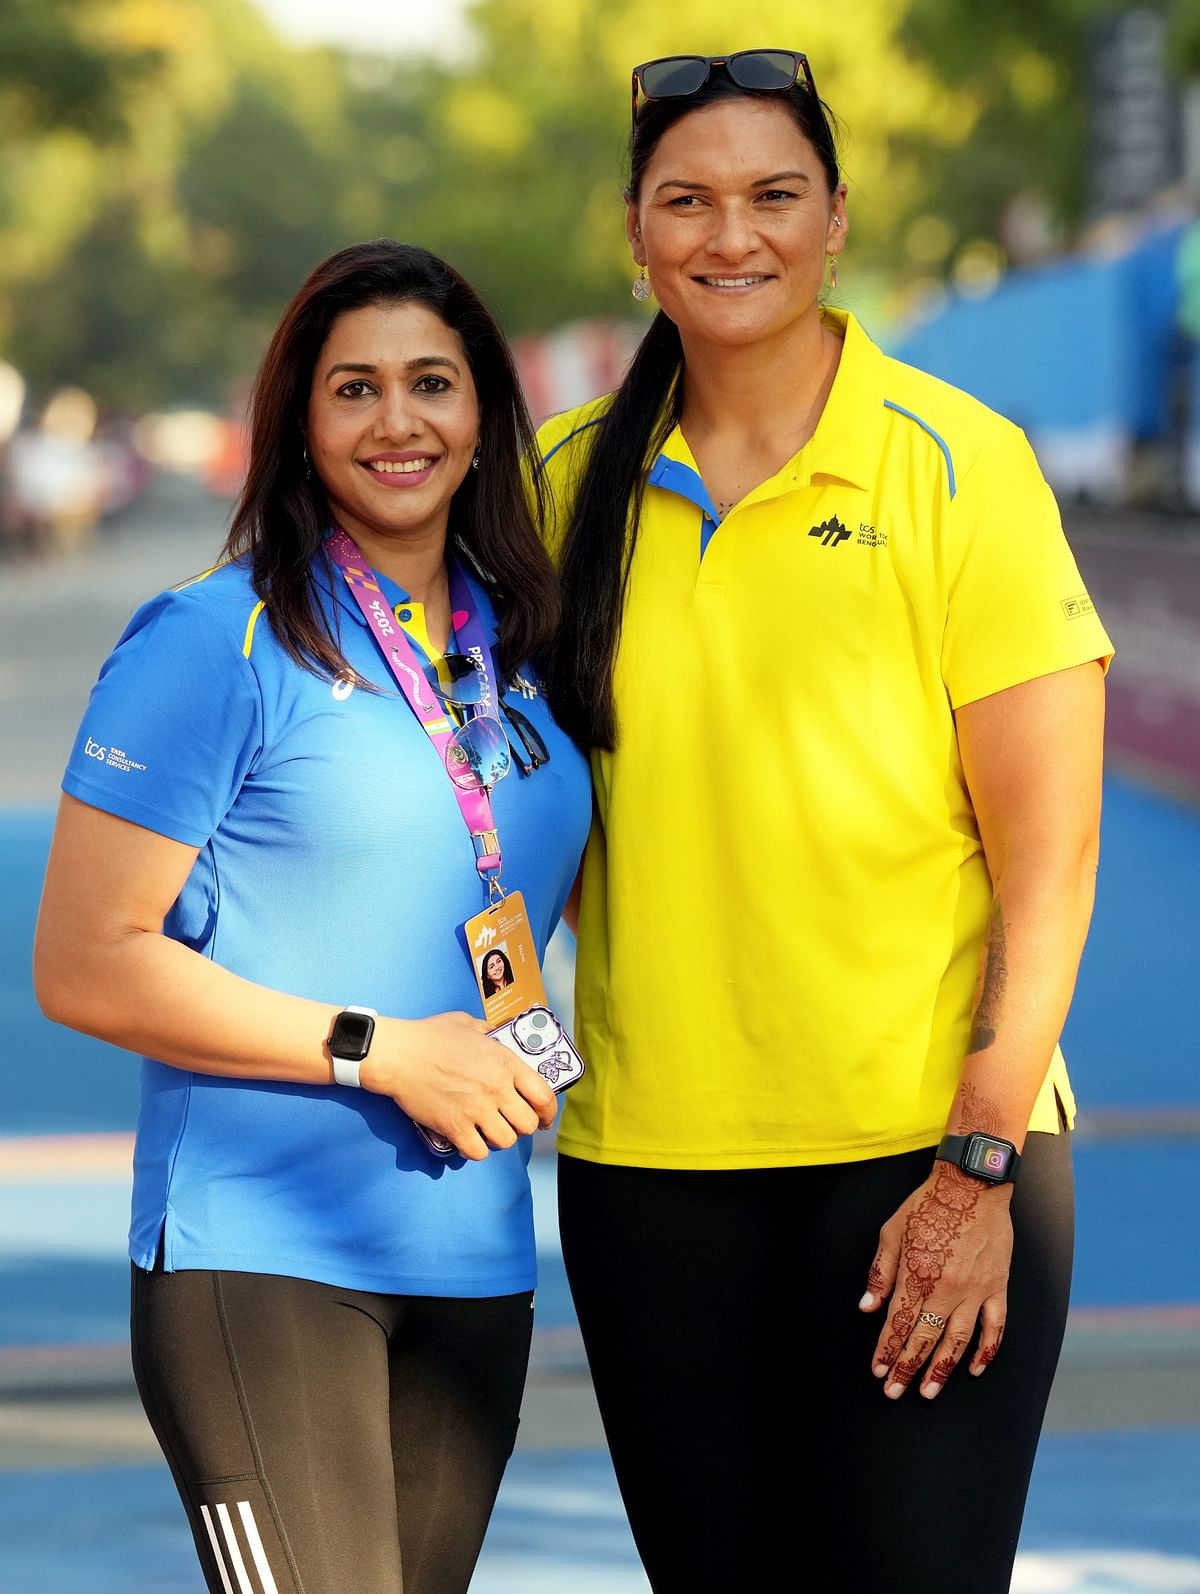 Two-time Olympic &amp; four-time Shot Put World Champion Valerie Adams and former Indian athlete Anju Bobby George during in the TCS World 10K Marathon, in Bengaluru, Sunday.